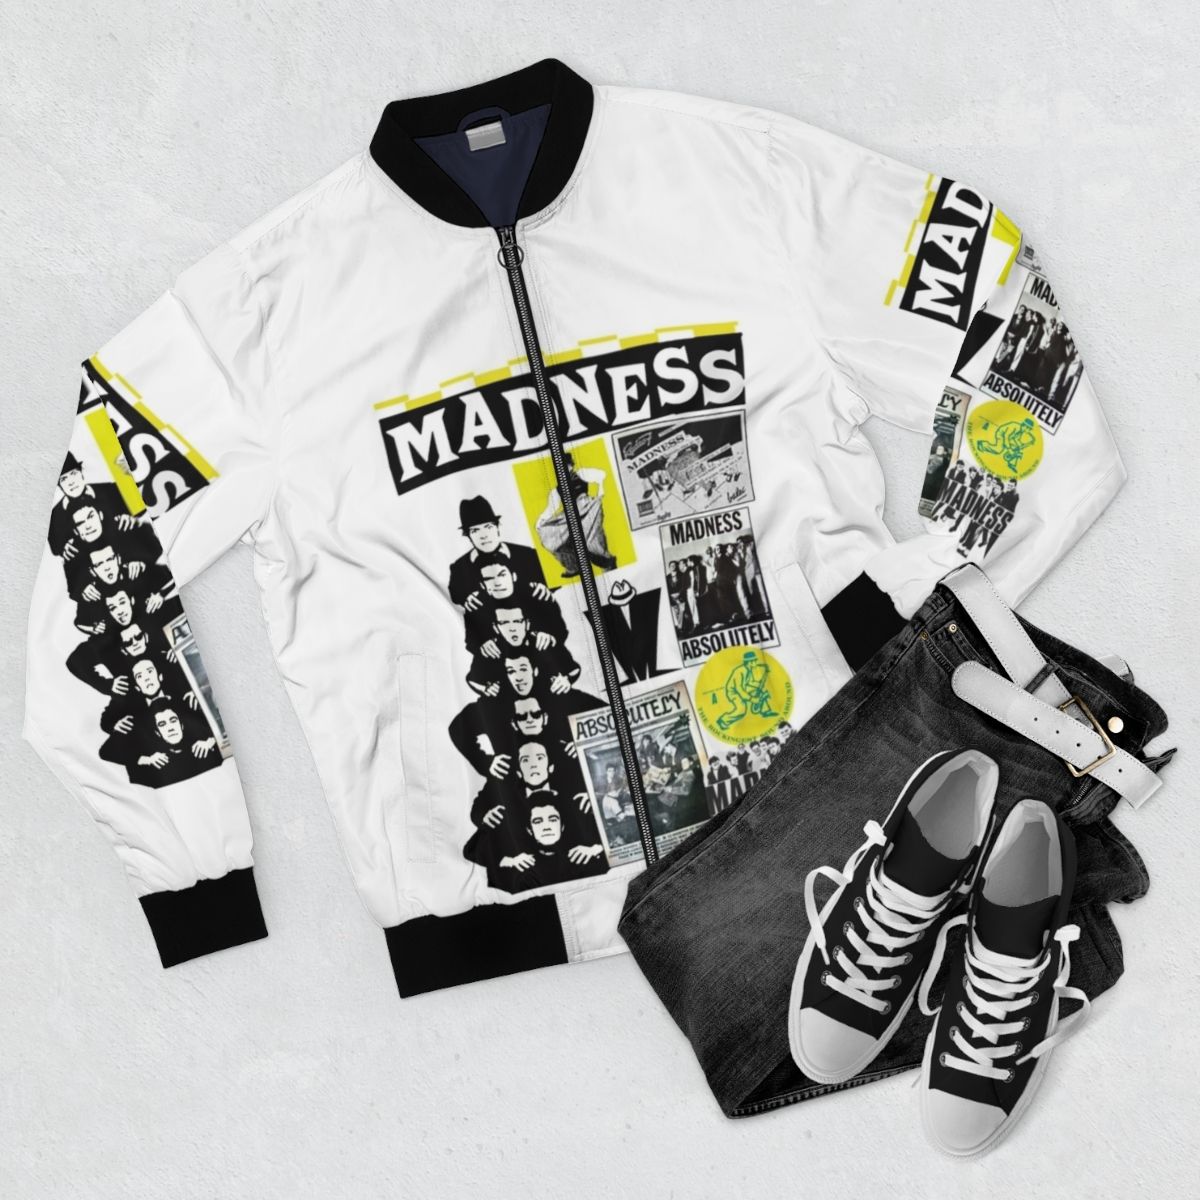 Madness band retro bomber jacket with vintage logo and graphics - Flat lay